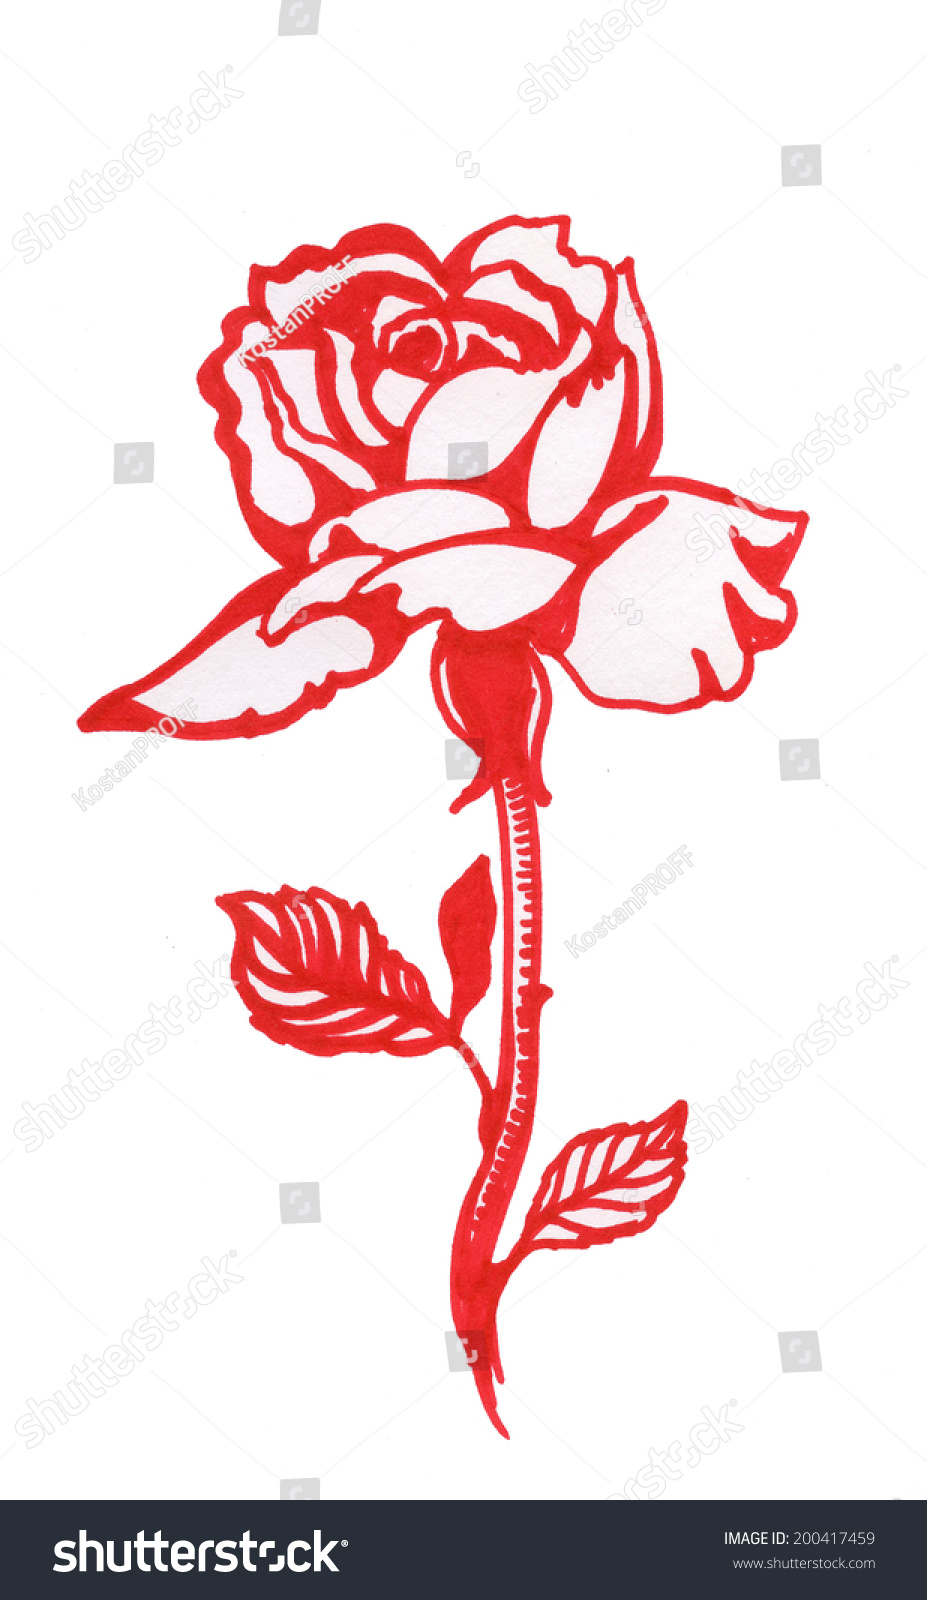 Handdrawn Red Rose Sketchstyle Isolated On Stock Vector 200417459